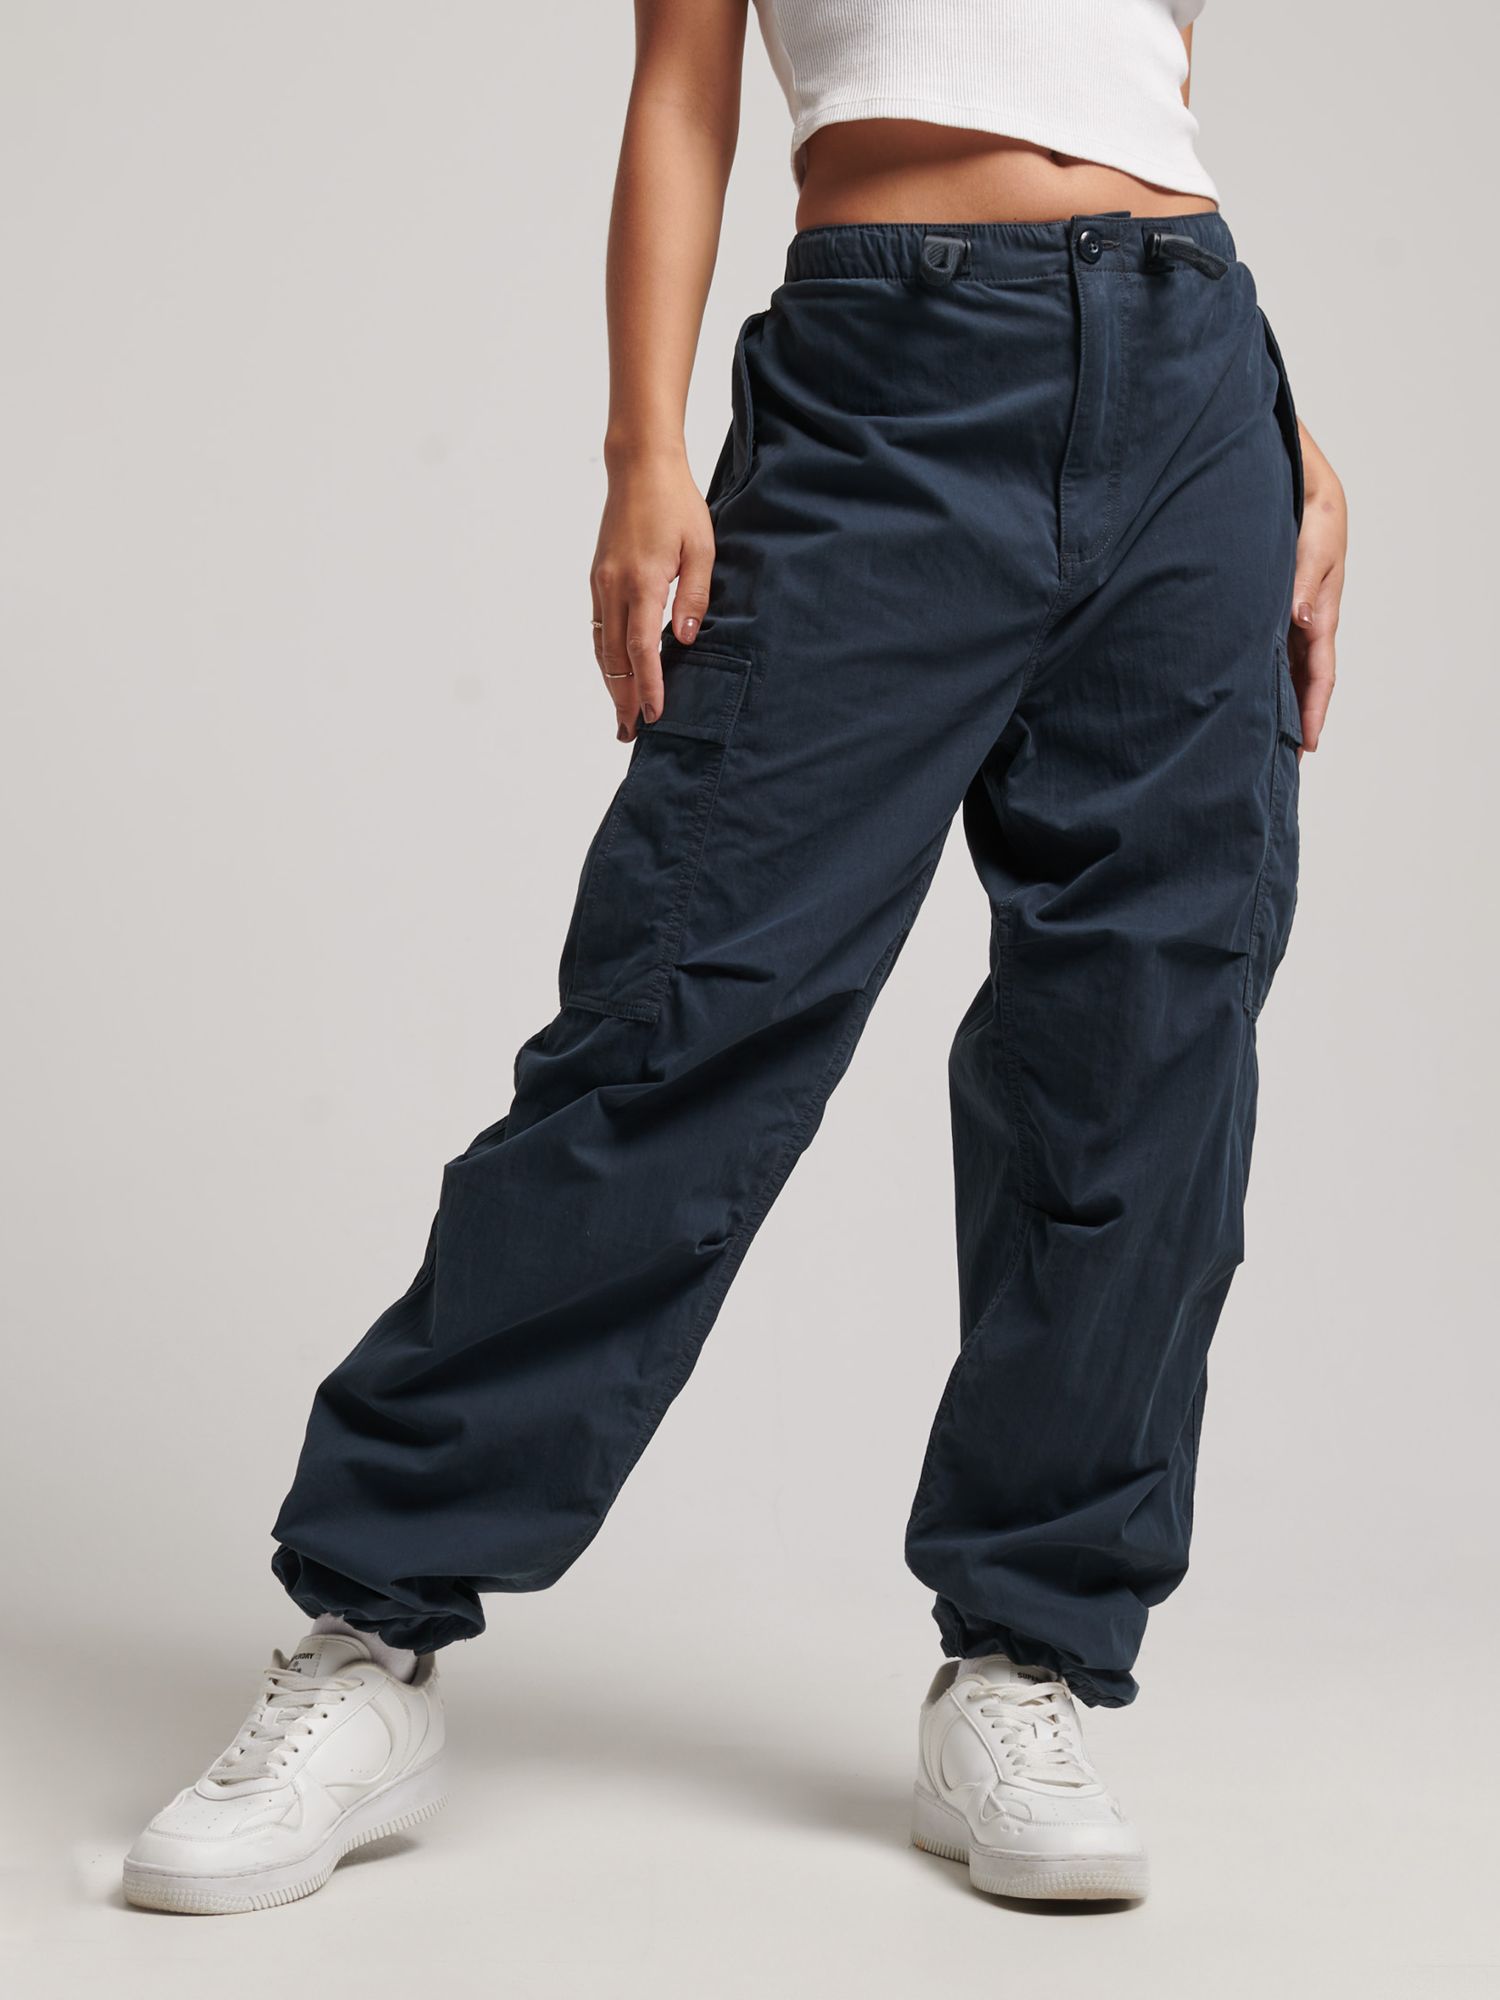 Men's Parachute Grip Trousers in Midnight Navy